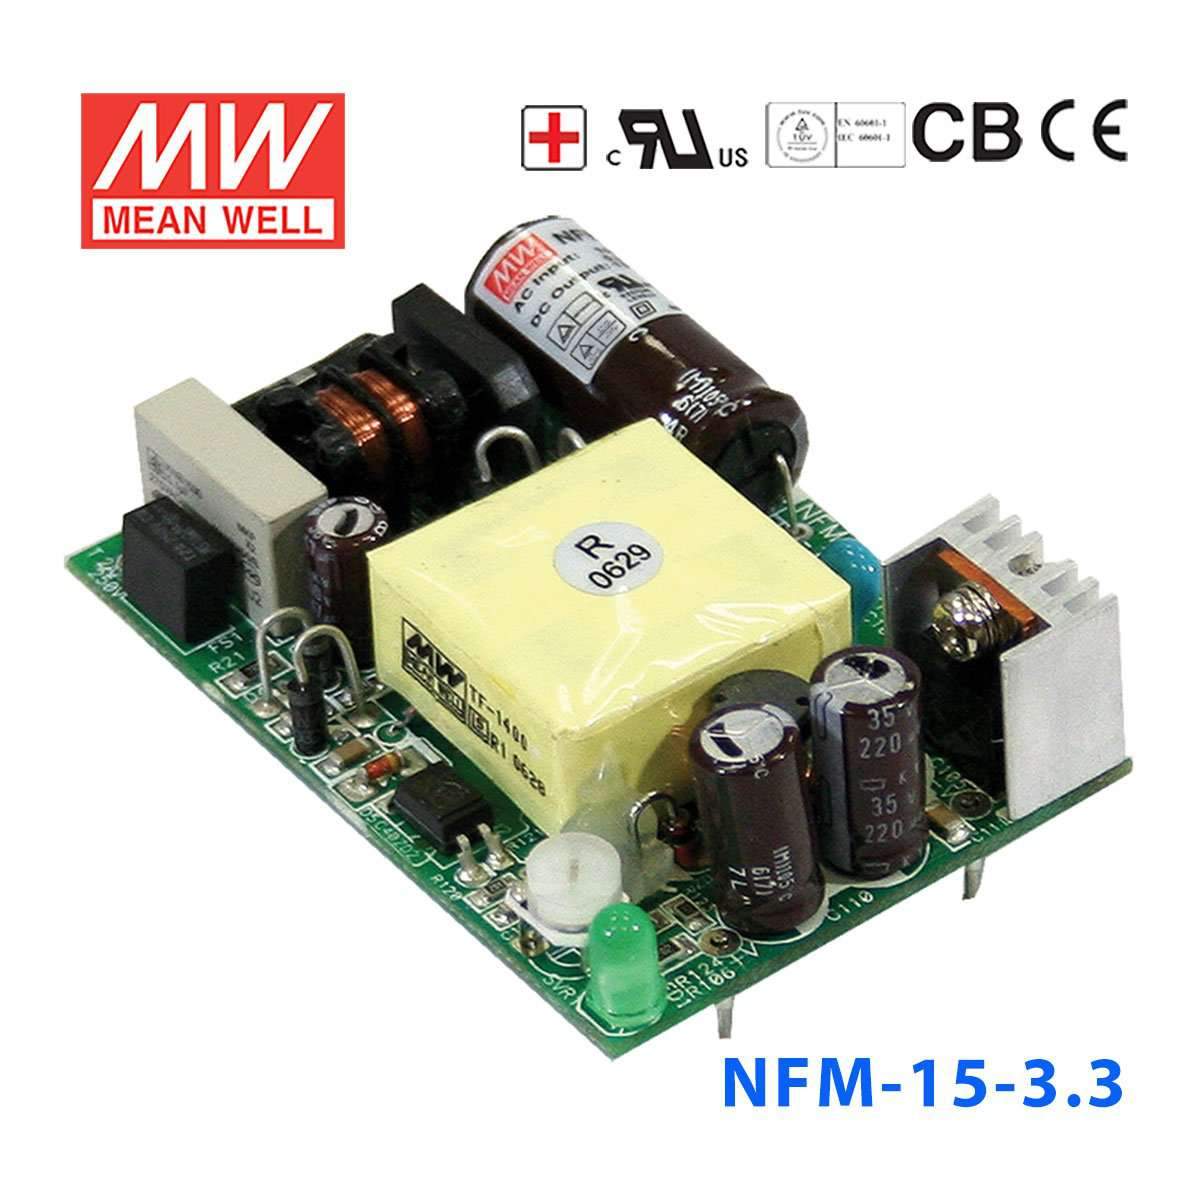 Mean Well NFM-15-3.3 Power Supply 15W 3.3V